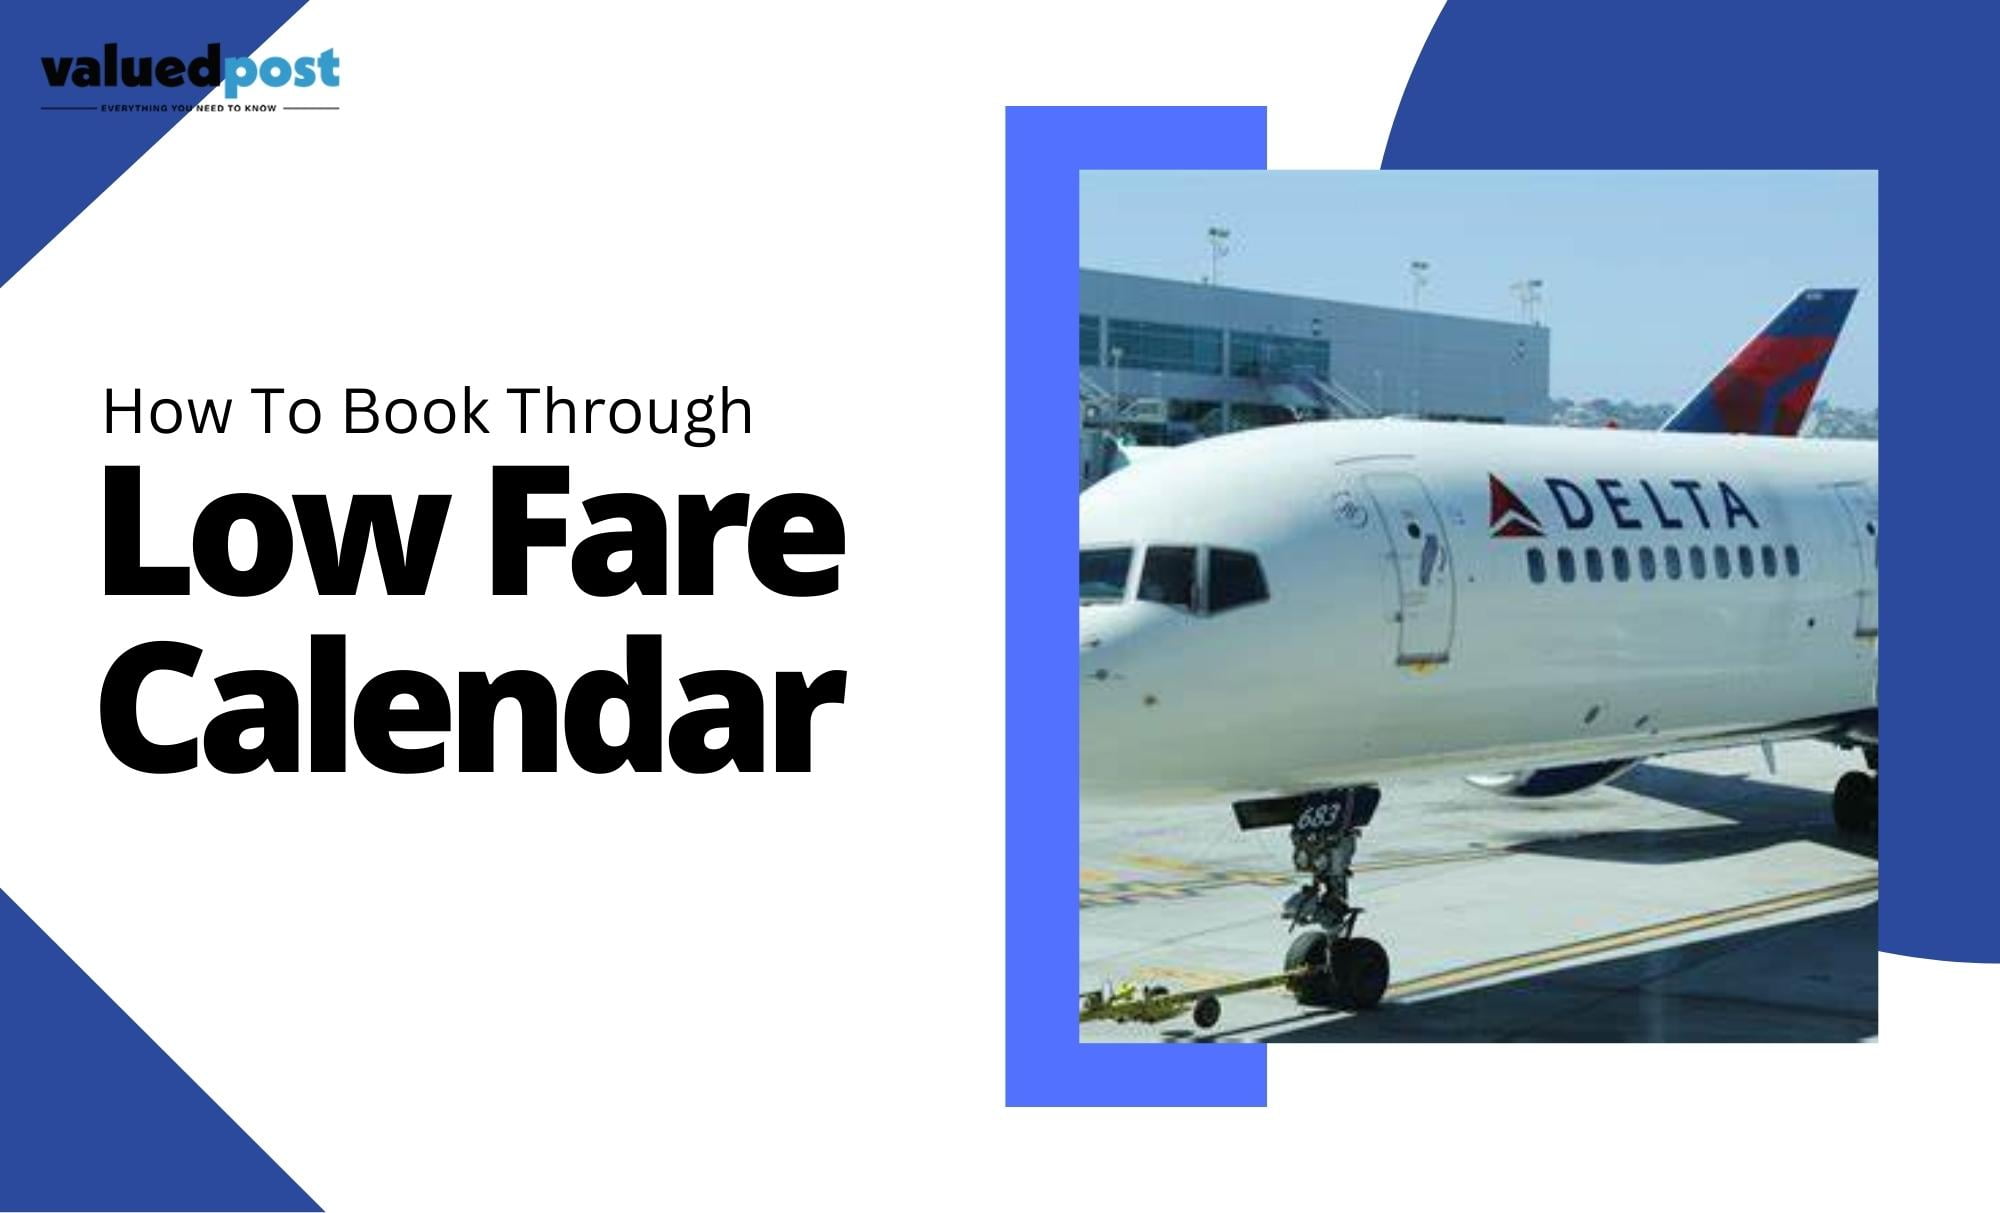 Delta Low Fare Calendar Looking for The Best Time to Book?